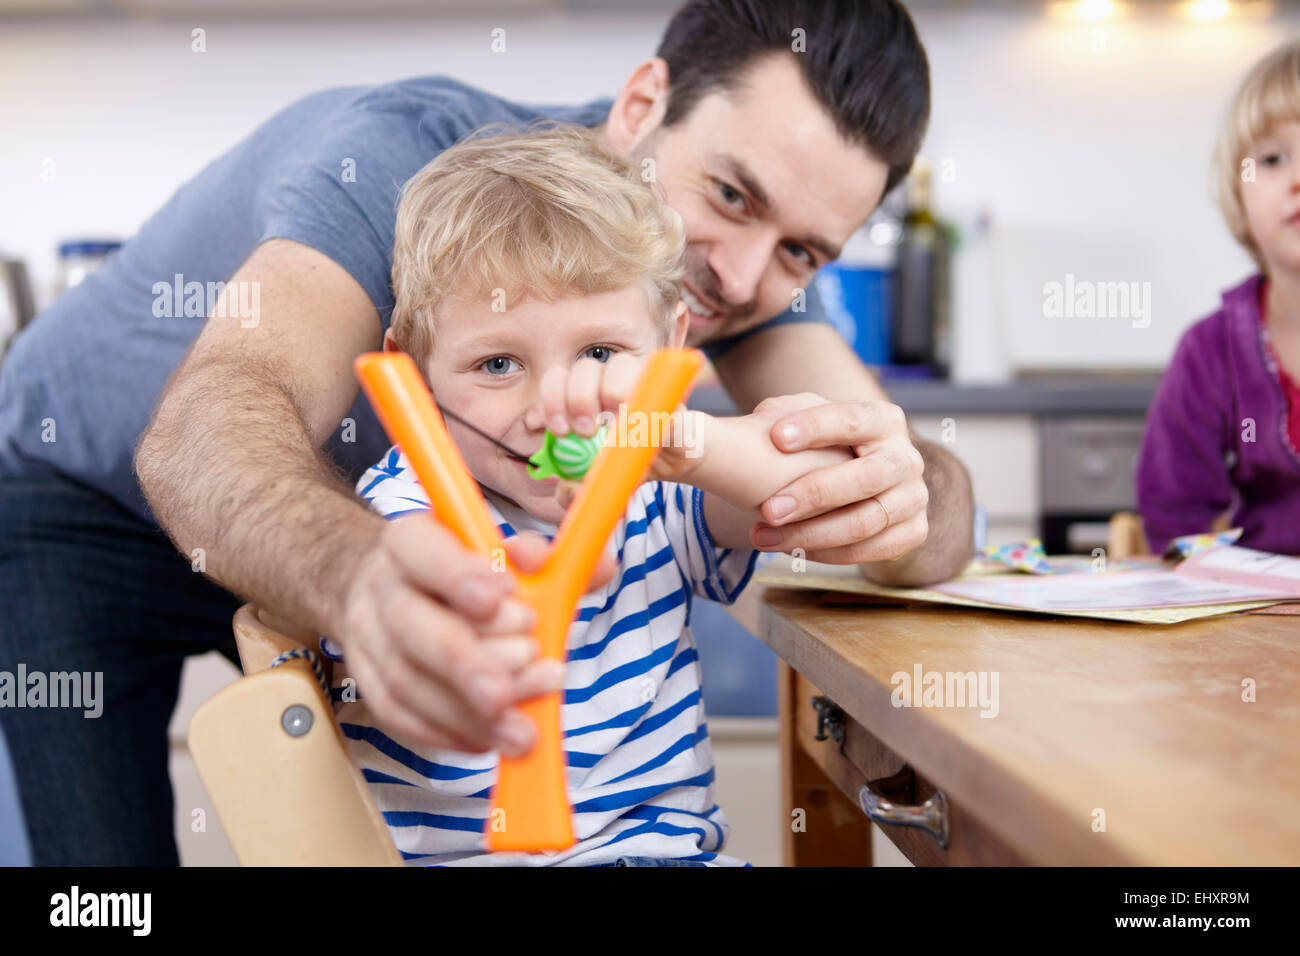 Little boy in kitchen learning to use slingshot Stock Photo